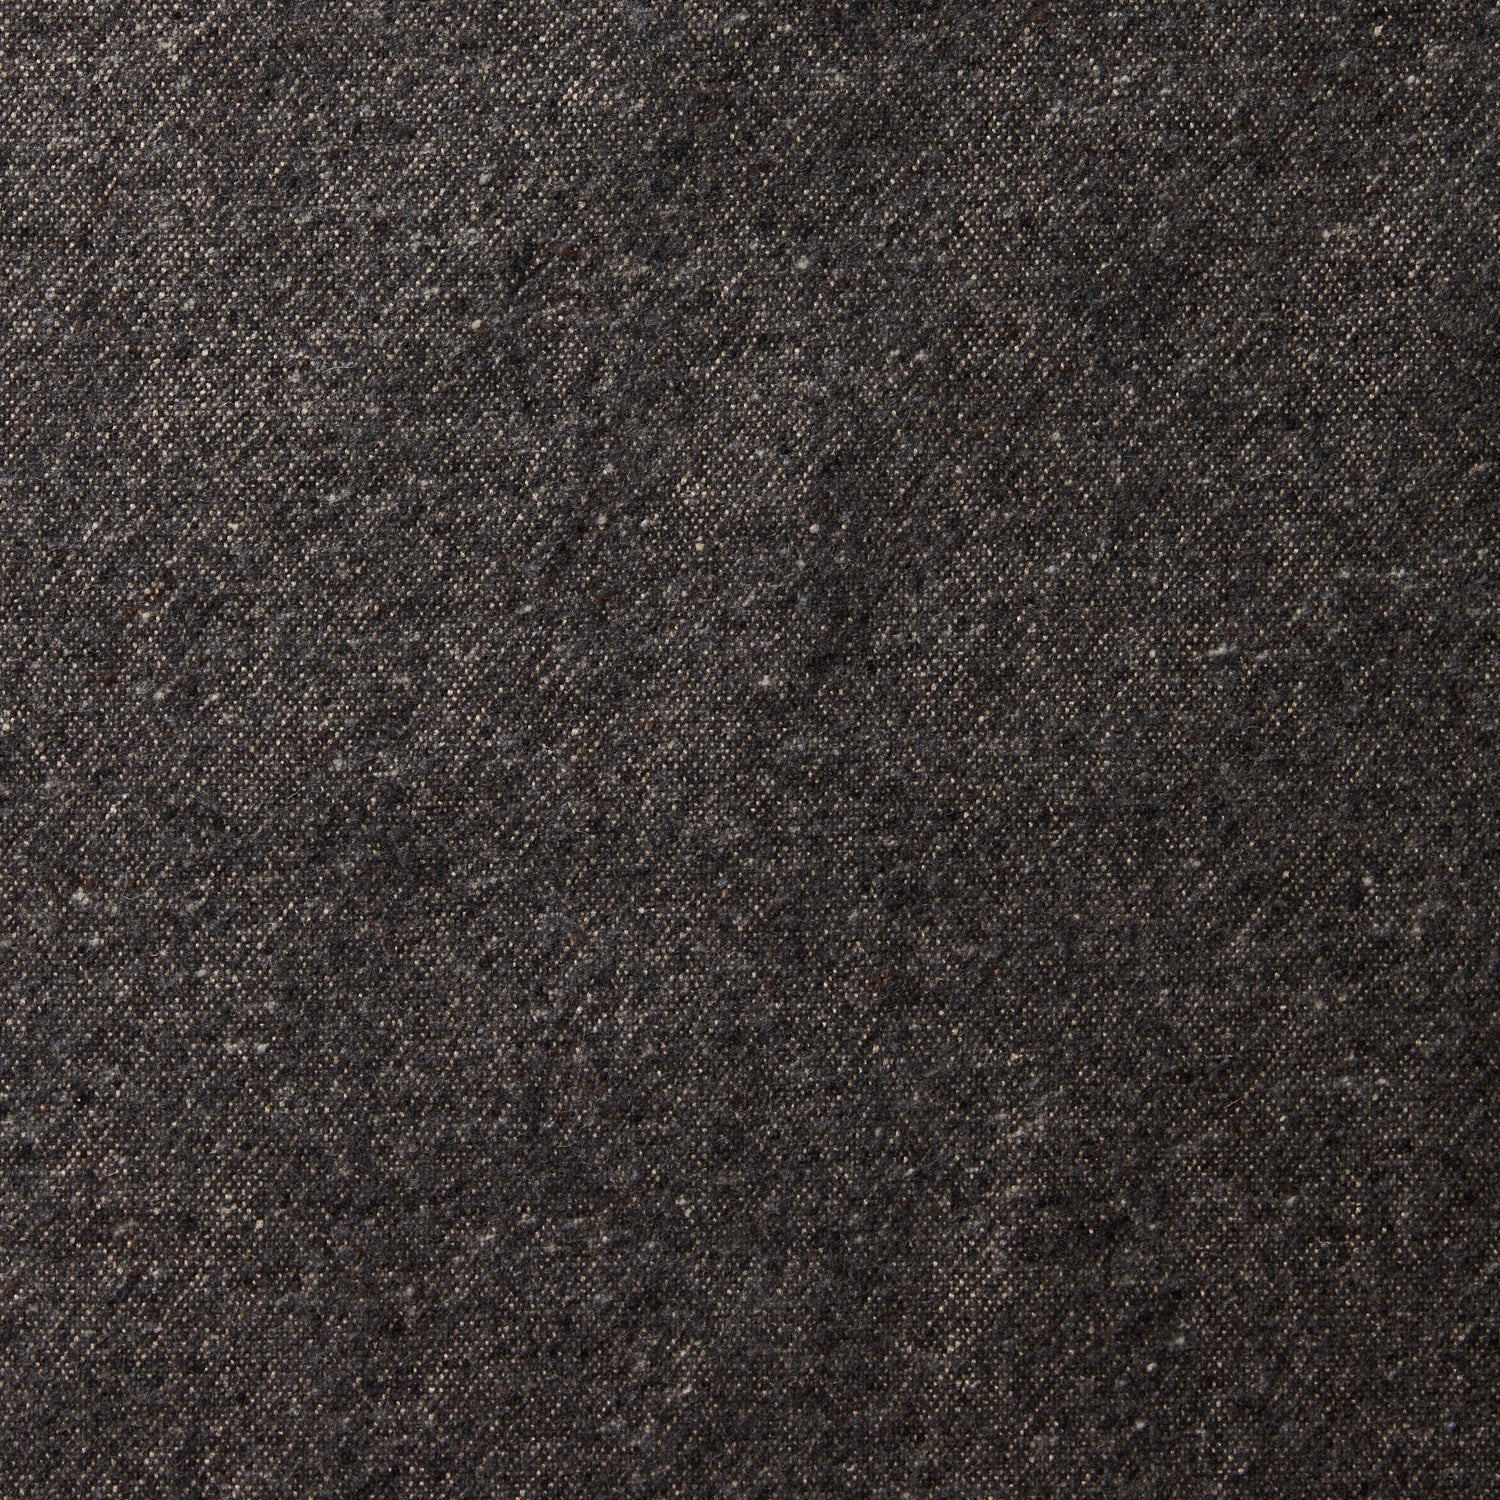 A swatch of blended linen-wool mix fabric in a flecked gray color.